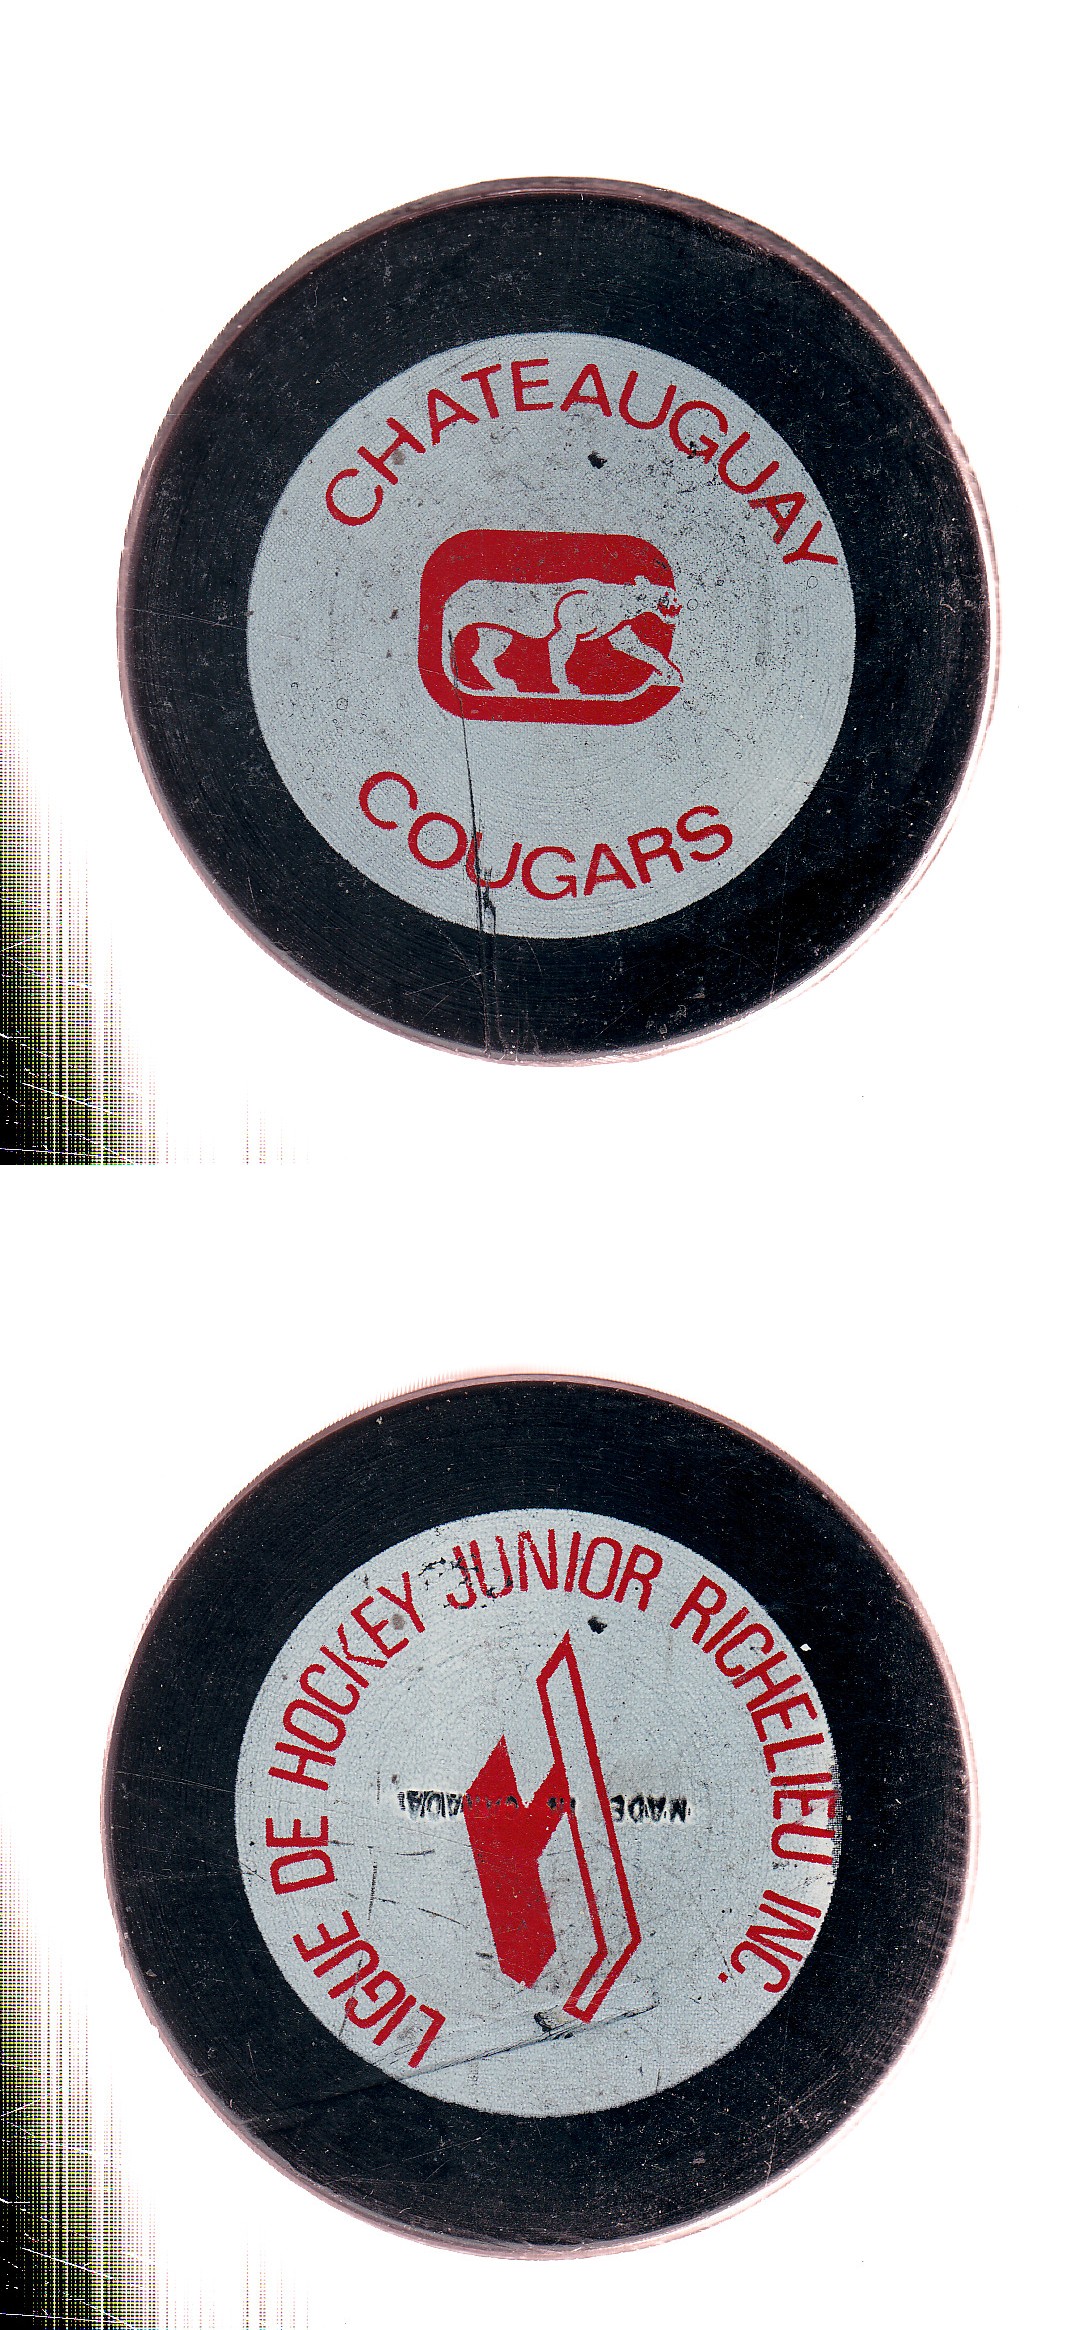 1973-76 BILTRITE CHATEAUGUAY COUGARS GAME PUCK photo